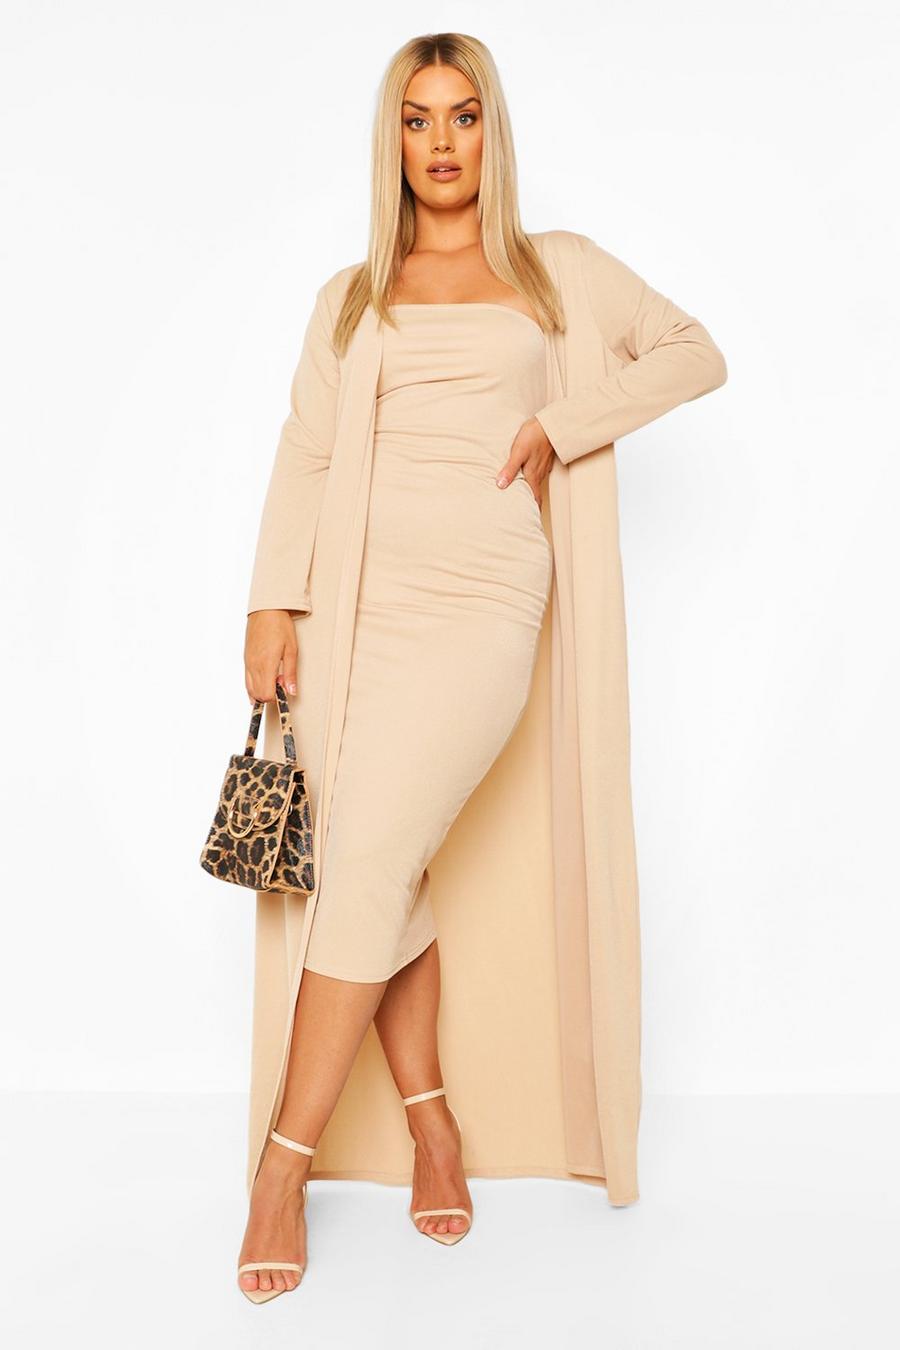 Stone beis Plus Bandeau Dress & Duster Co-Ord